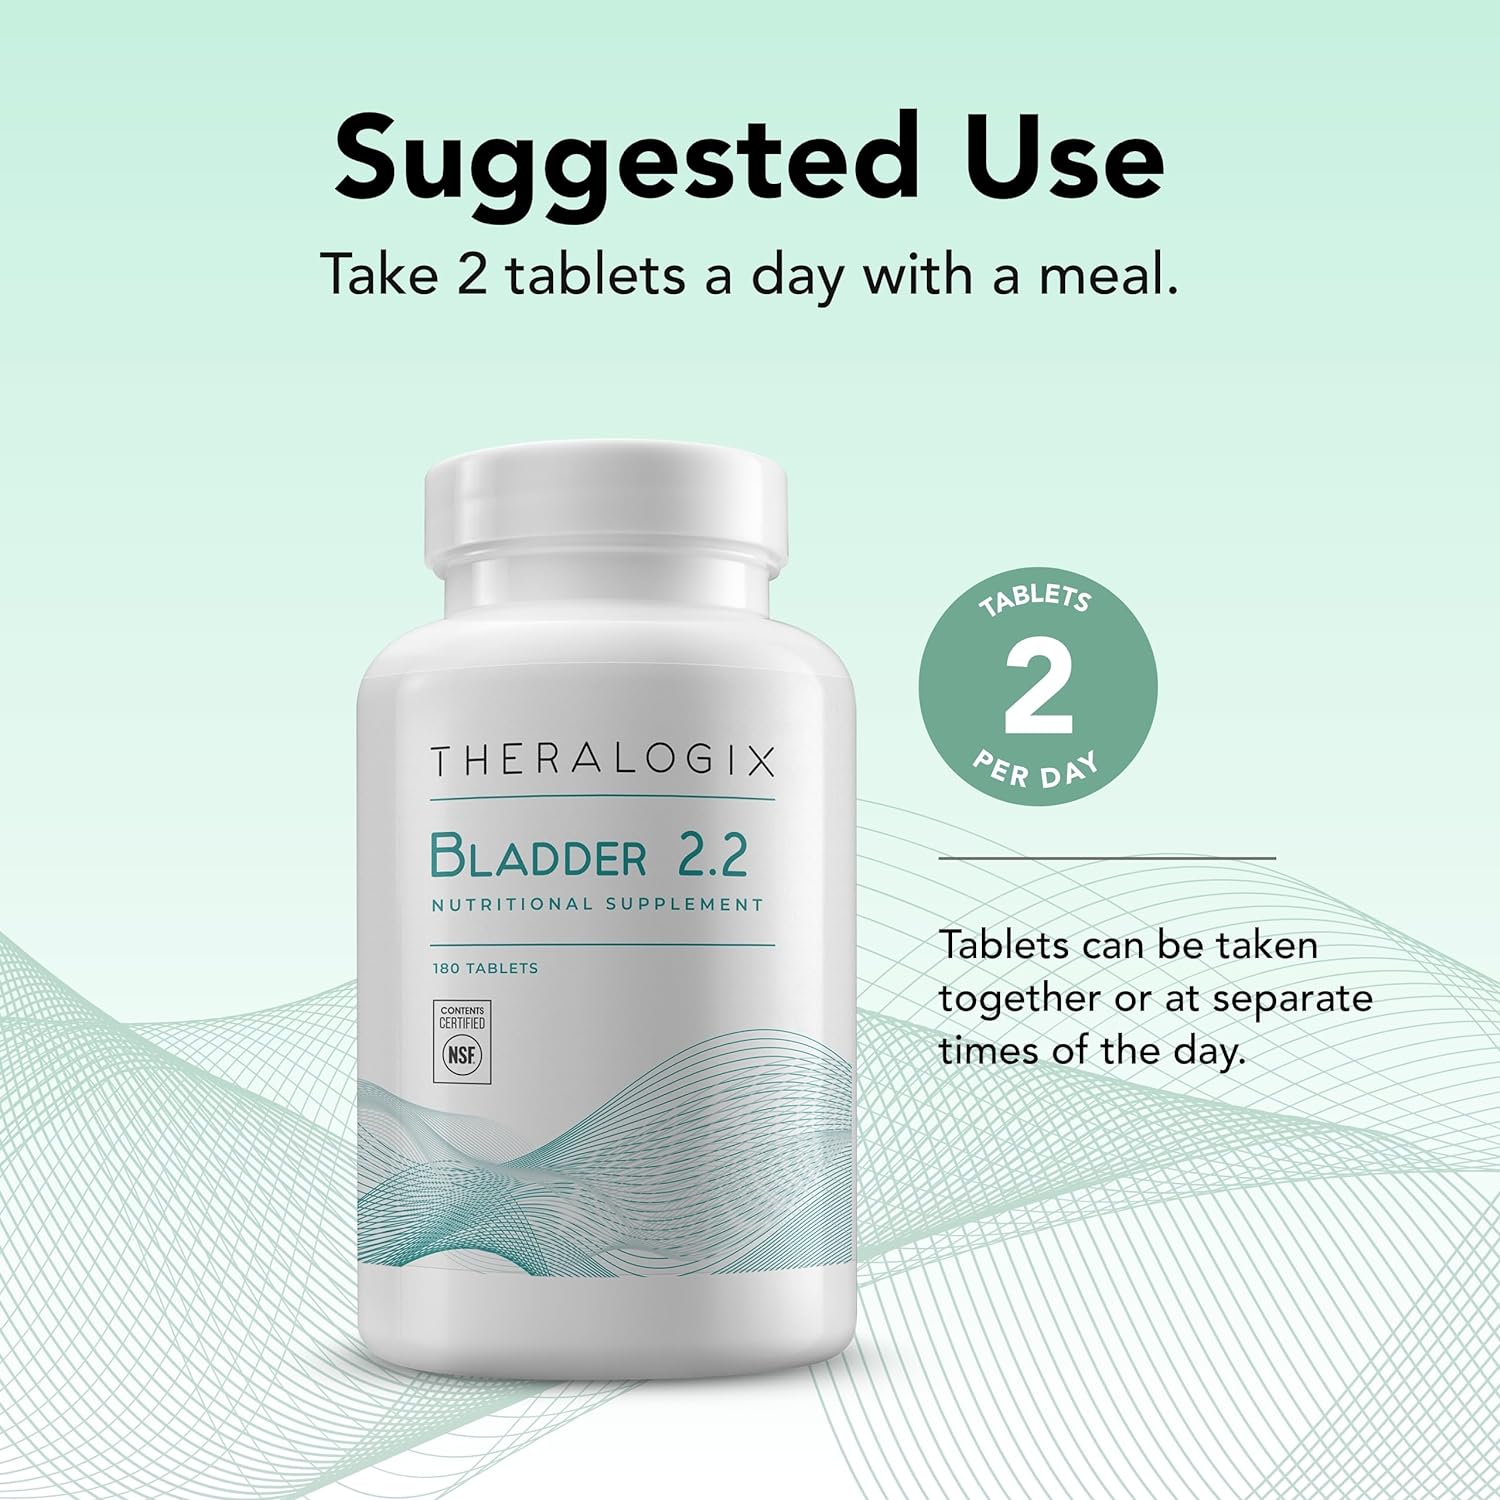 Theralogix Bladder 2.2 Multivitamin & Multimineral Supplement - 90-Day Supply - Bladder Support Supplement for Men & Women - Vitamins A, C, D, E, Zinc & More - NSF Certified - 180 Tablets : Health & Household